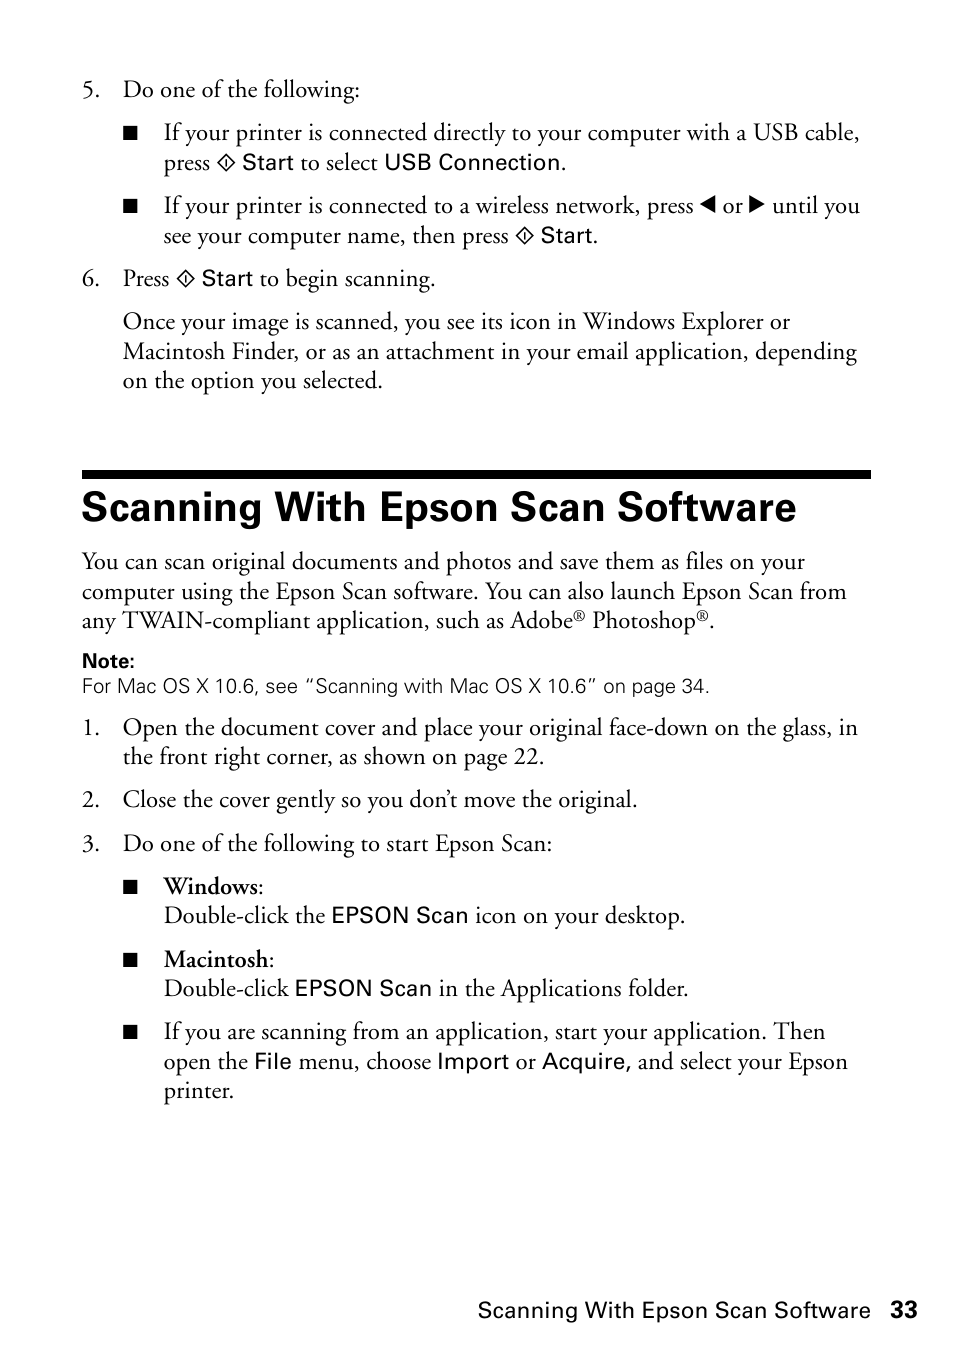 Scanning with epson scan software | Epson Stylus NX420 User Manual | Page 33 / 56